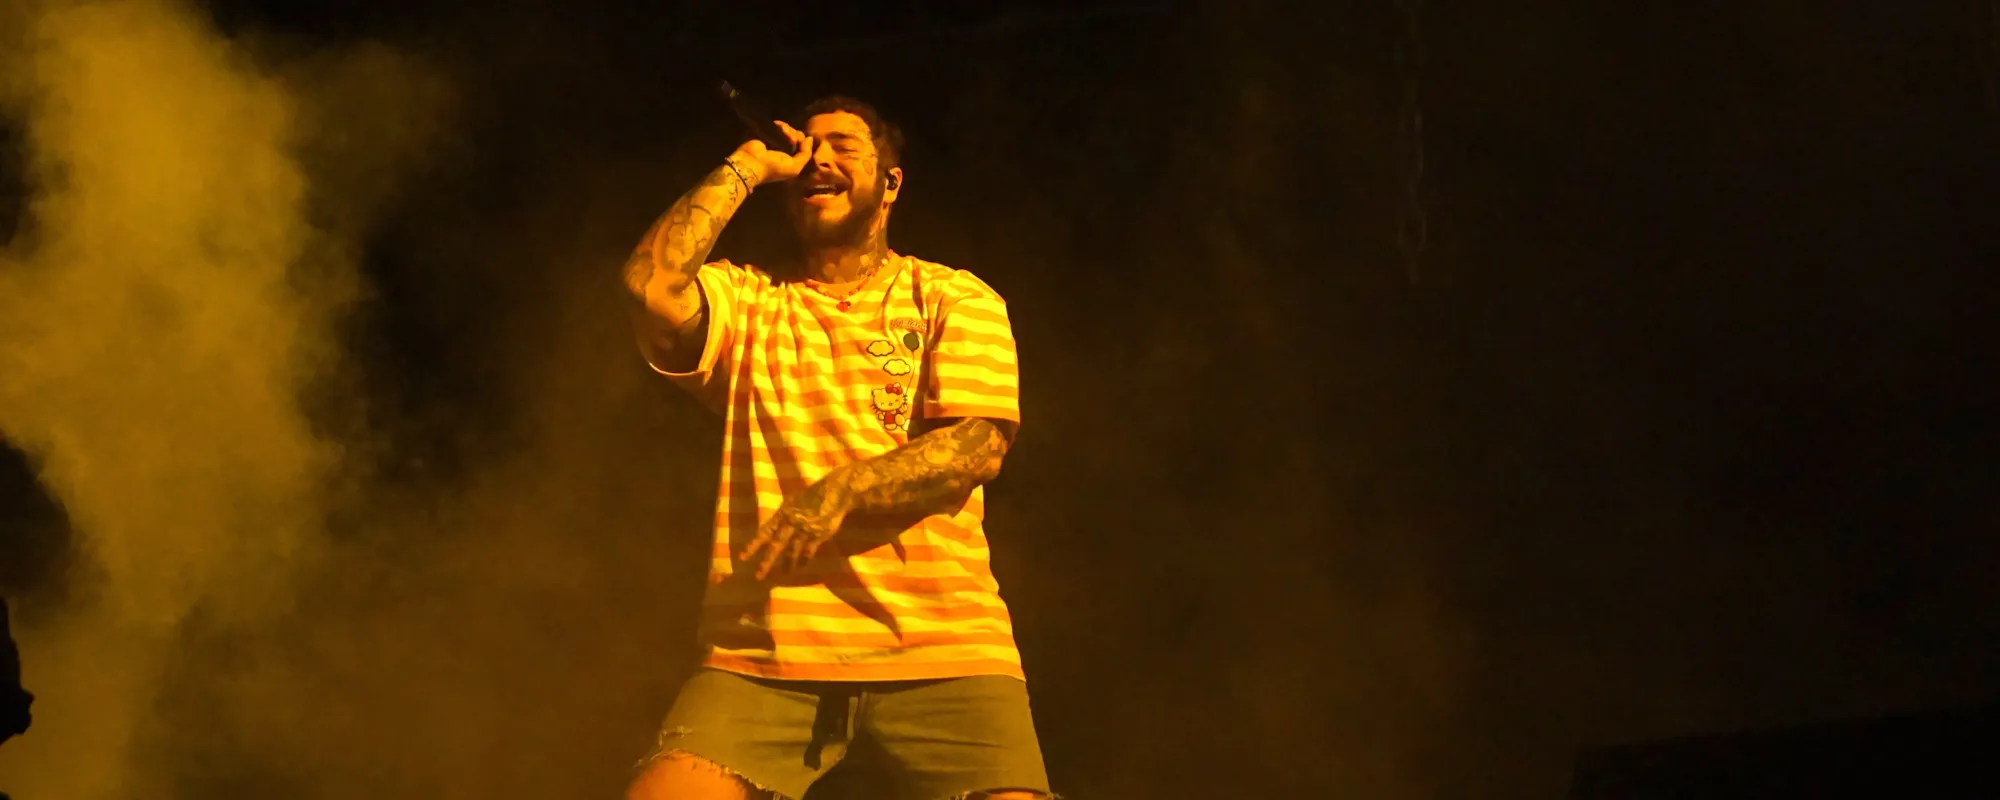 Post Malone Assists Couple in Gender Reveal Onstage – “You’re Going To Be a Girl Dad”